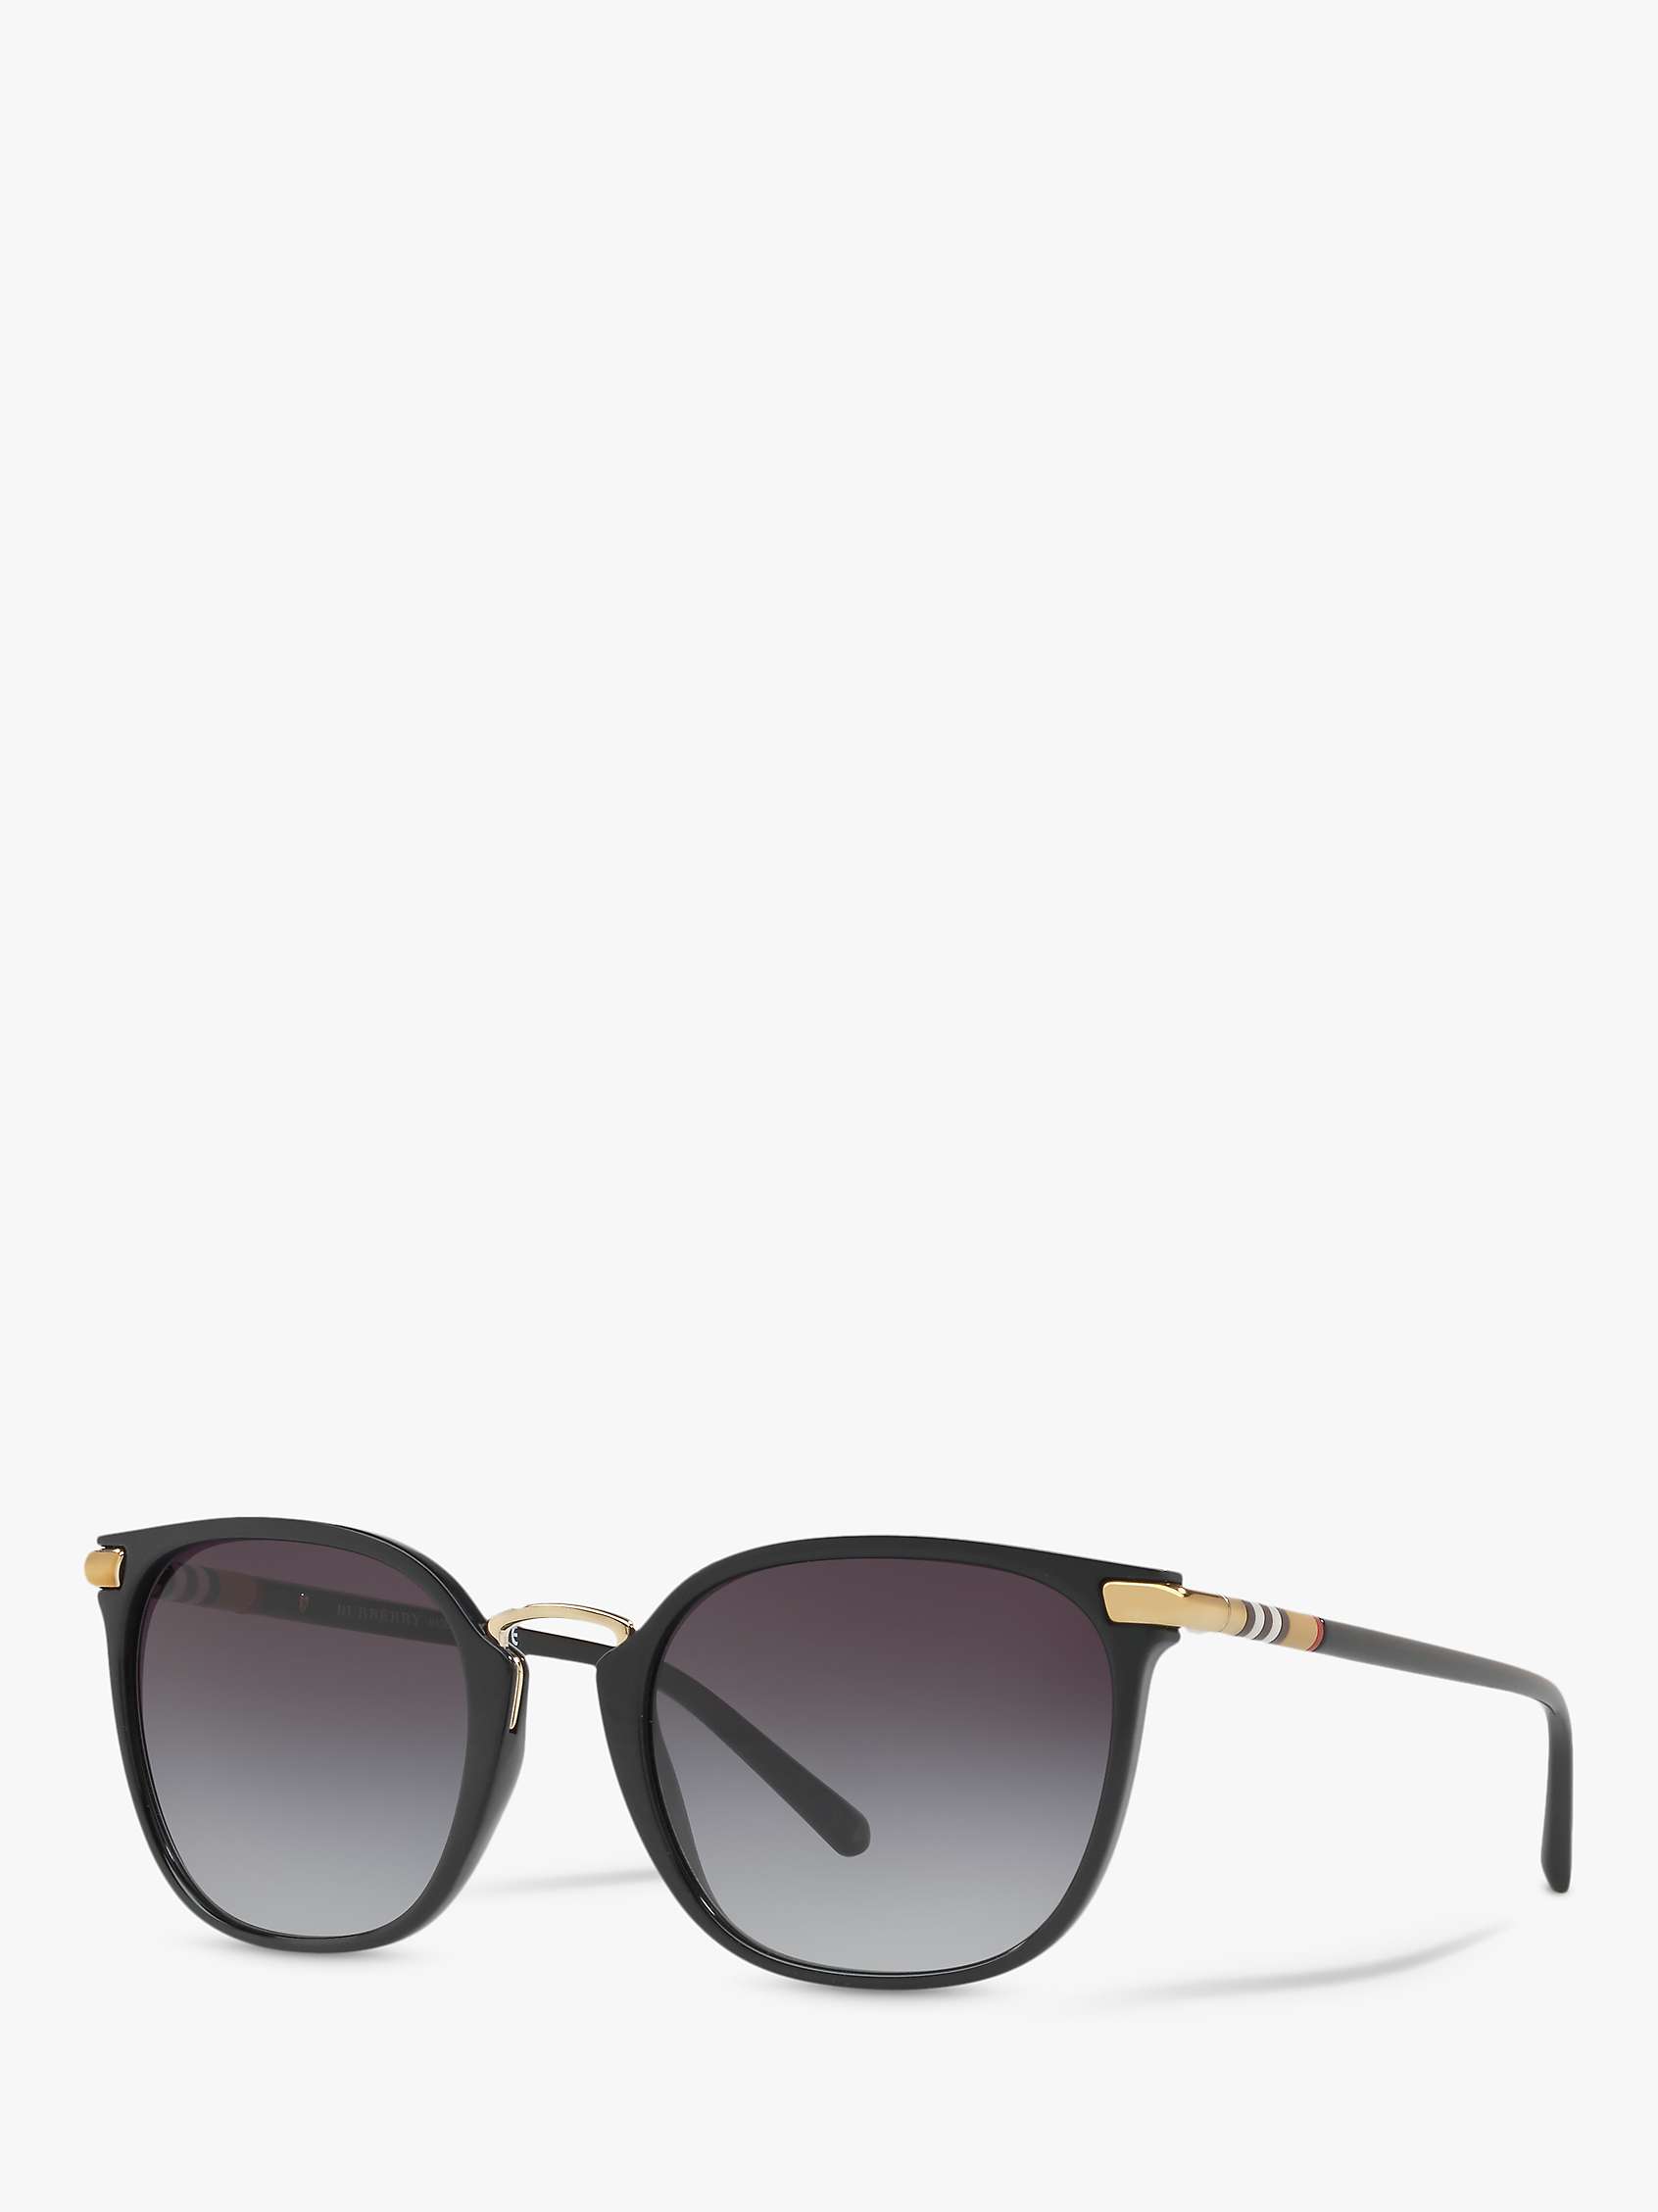 Buy Burberry BE4262 Women's Square Sunglasses Online at johnlewis.com